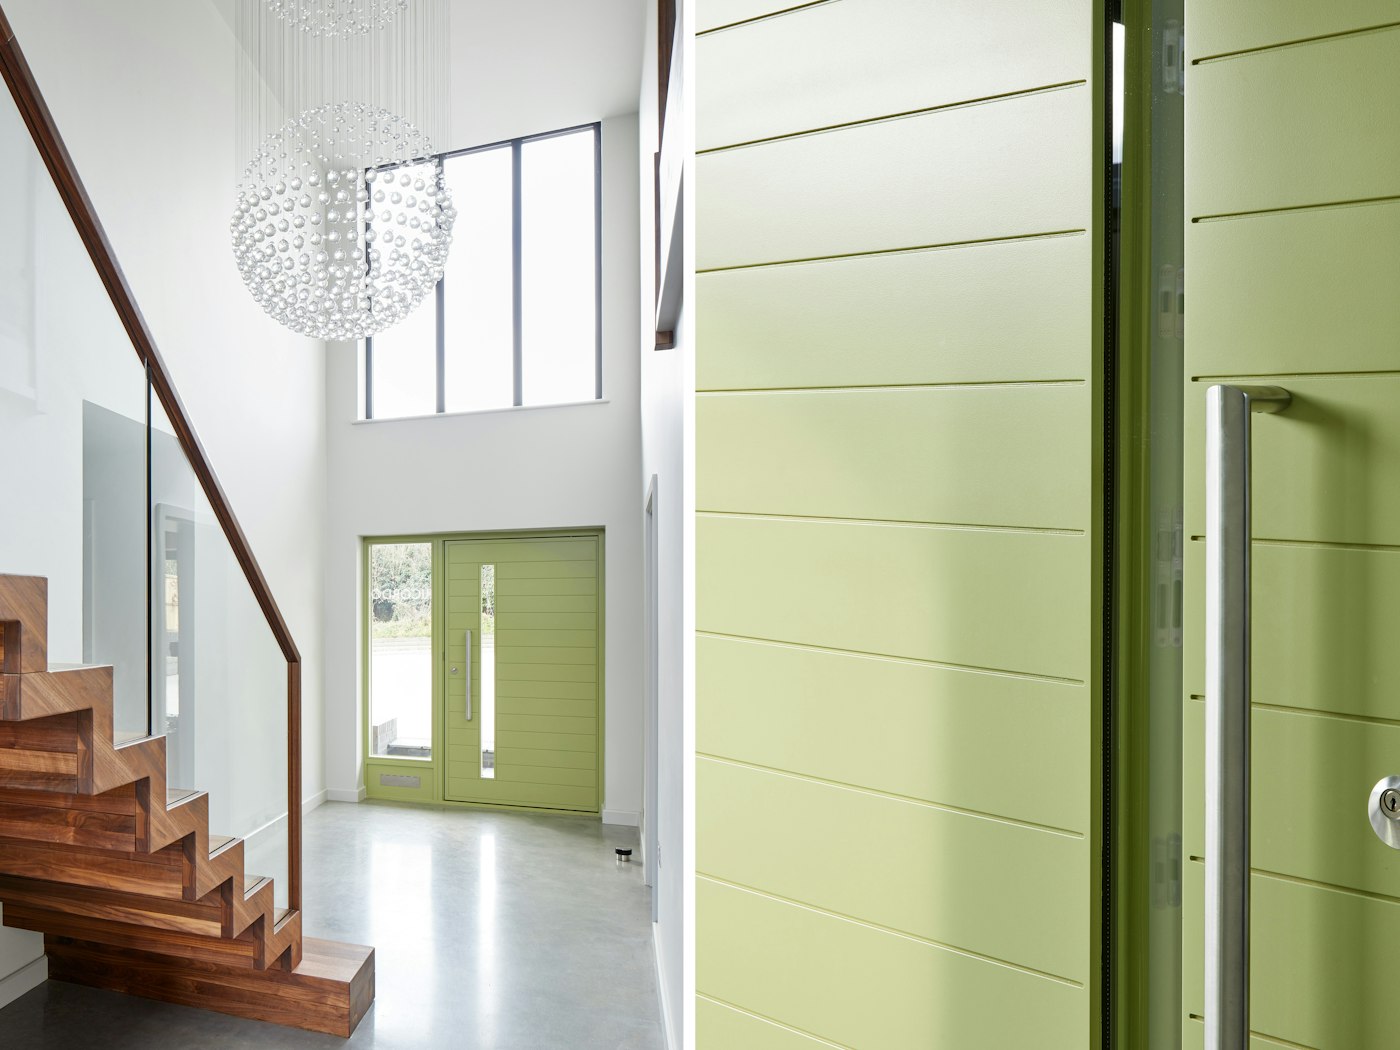 The clean white interior is the perfect base to show off the bold green door and rich walnut staircase